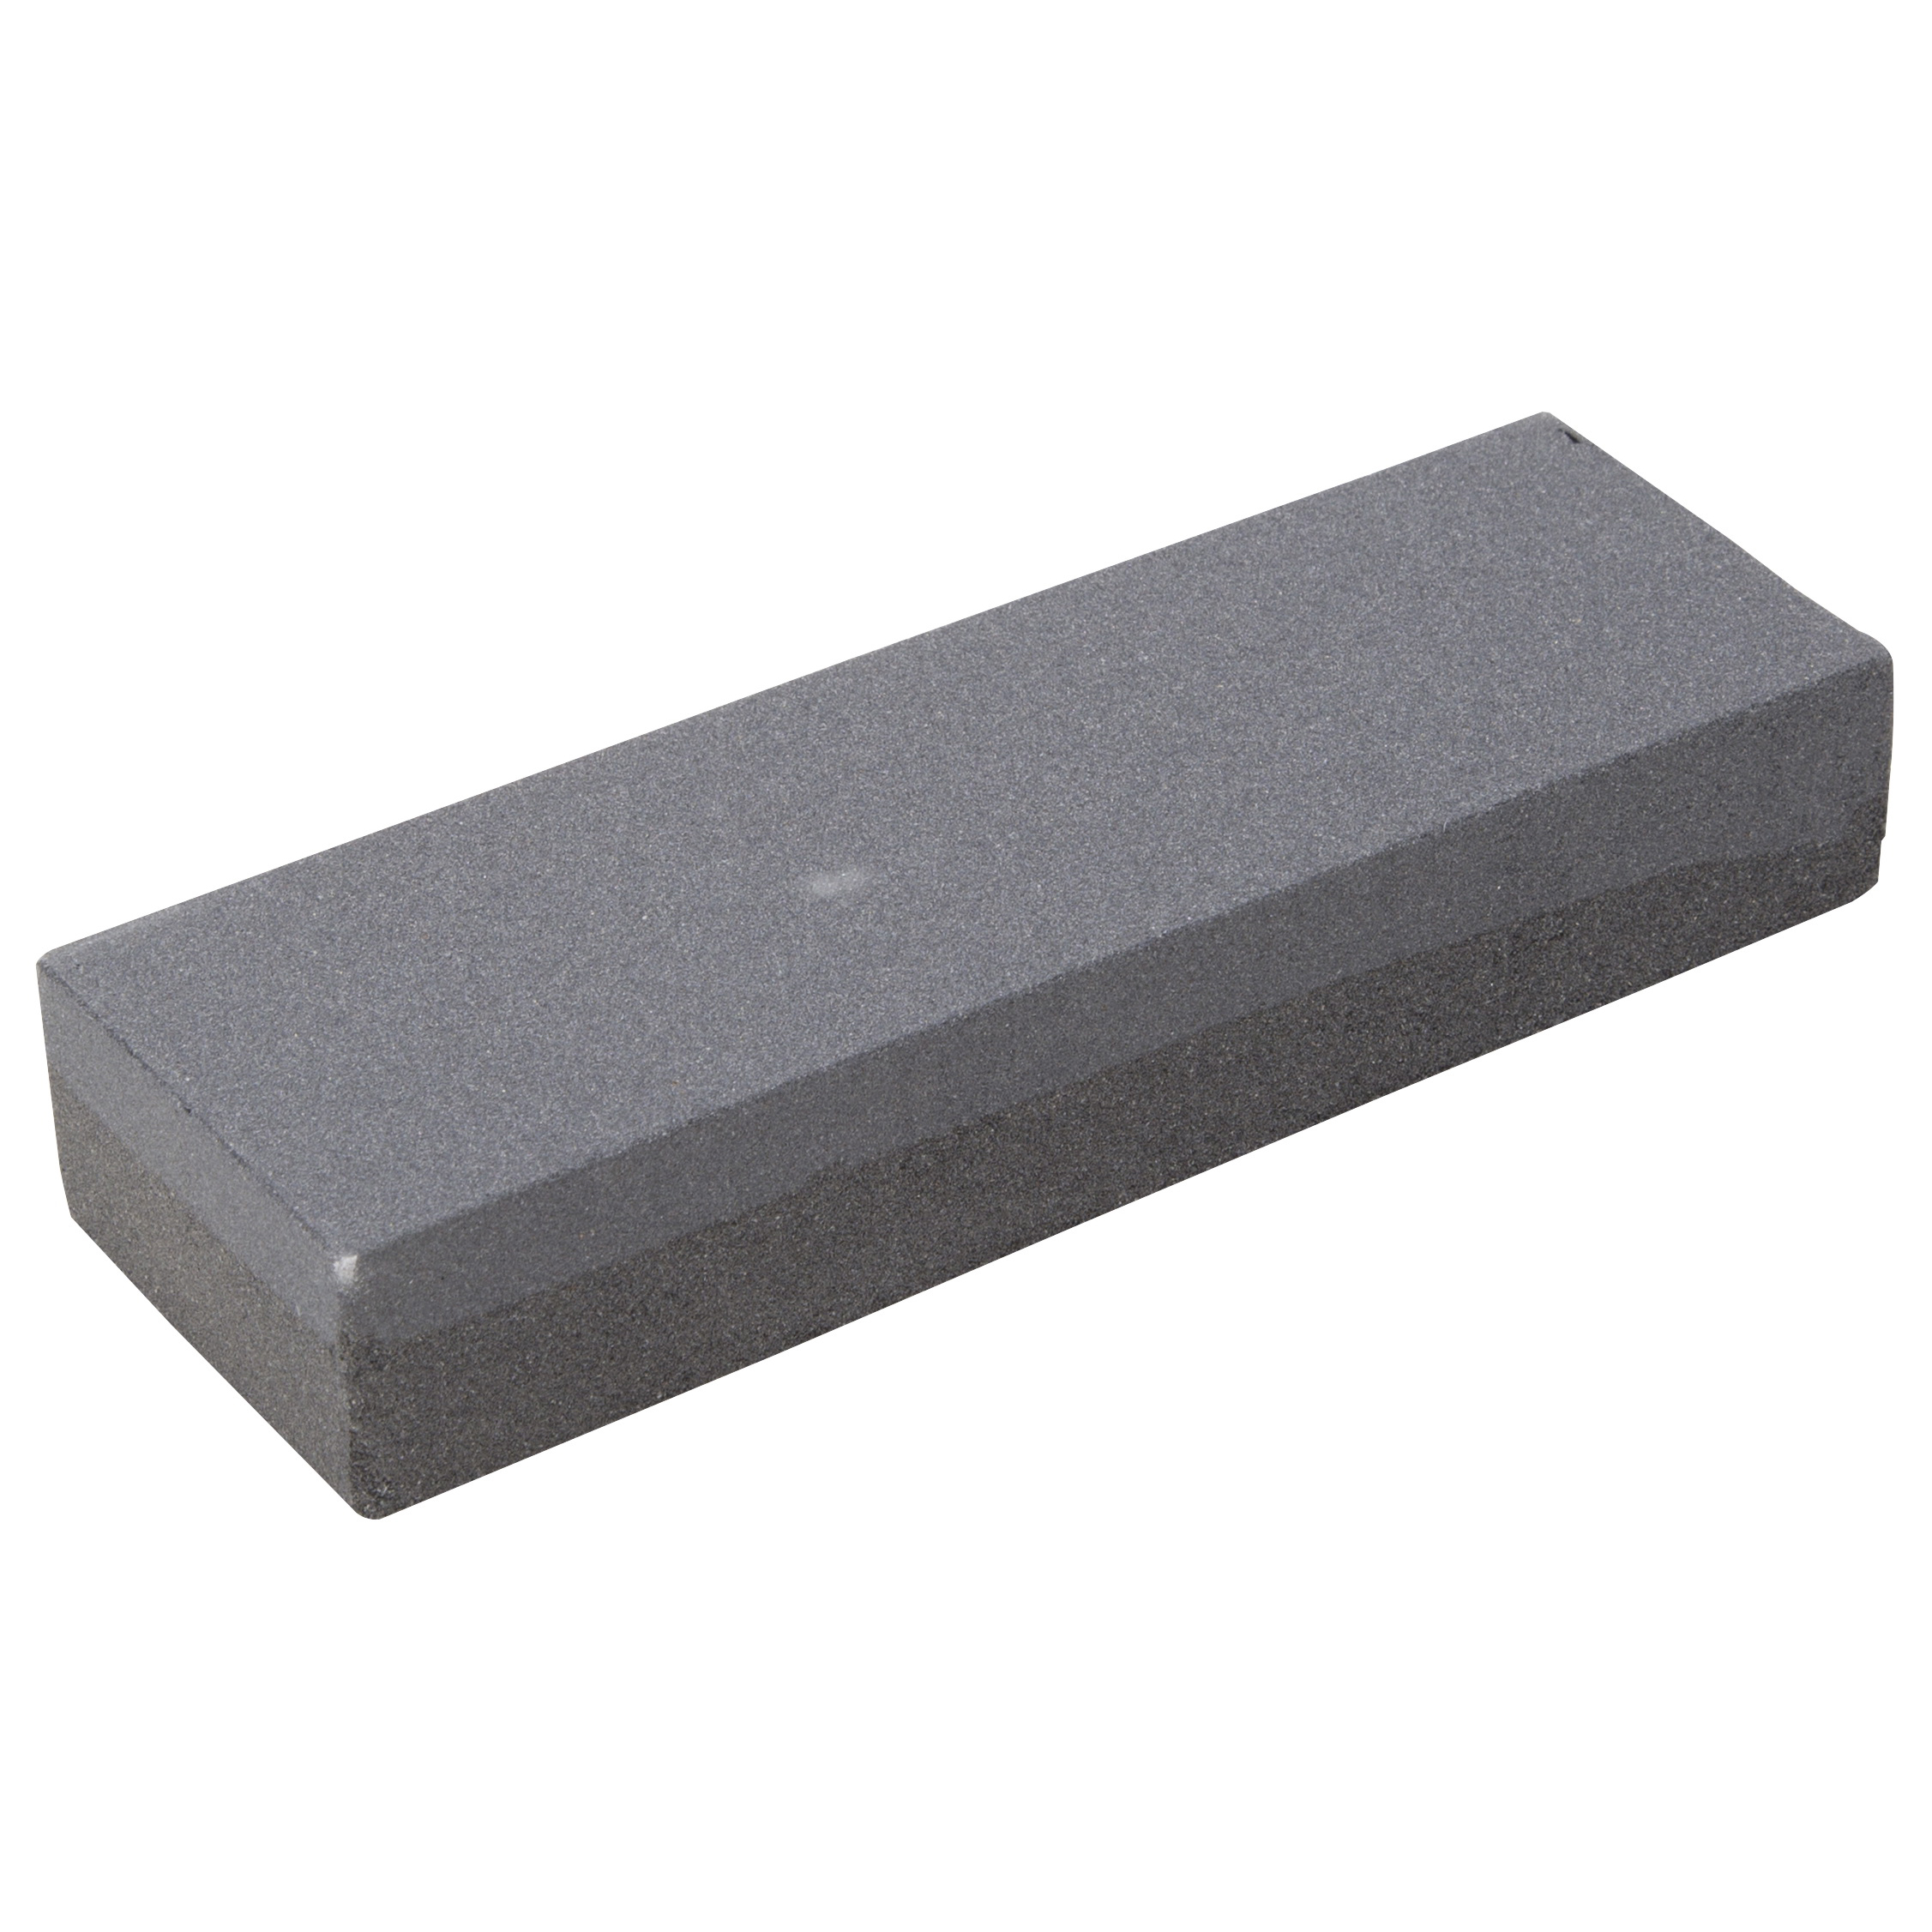 CLP0034S-6 Sharpening Stone, 6 in L, 2 in W, 1 in Thick, 120, 240 Grit, Coarse and Fine, Silicon Carbide Abrasive